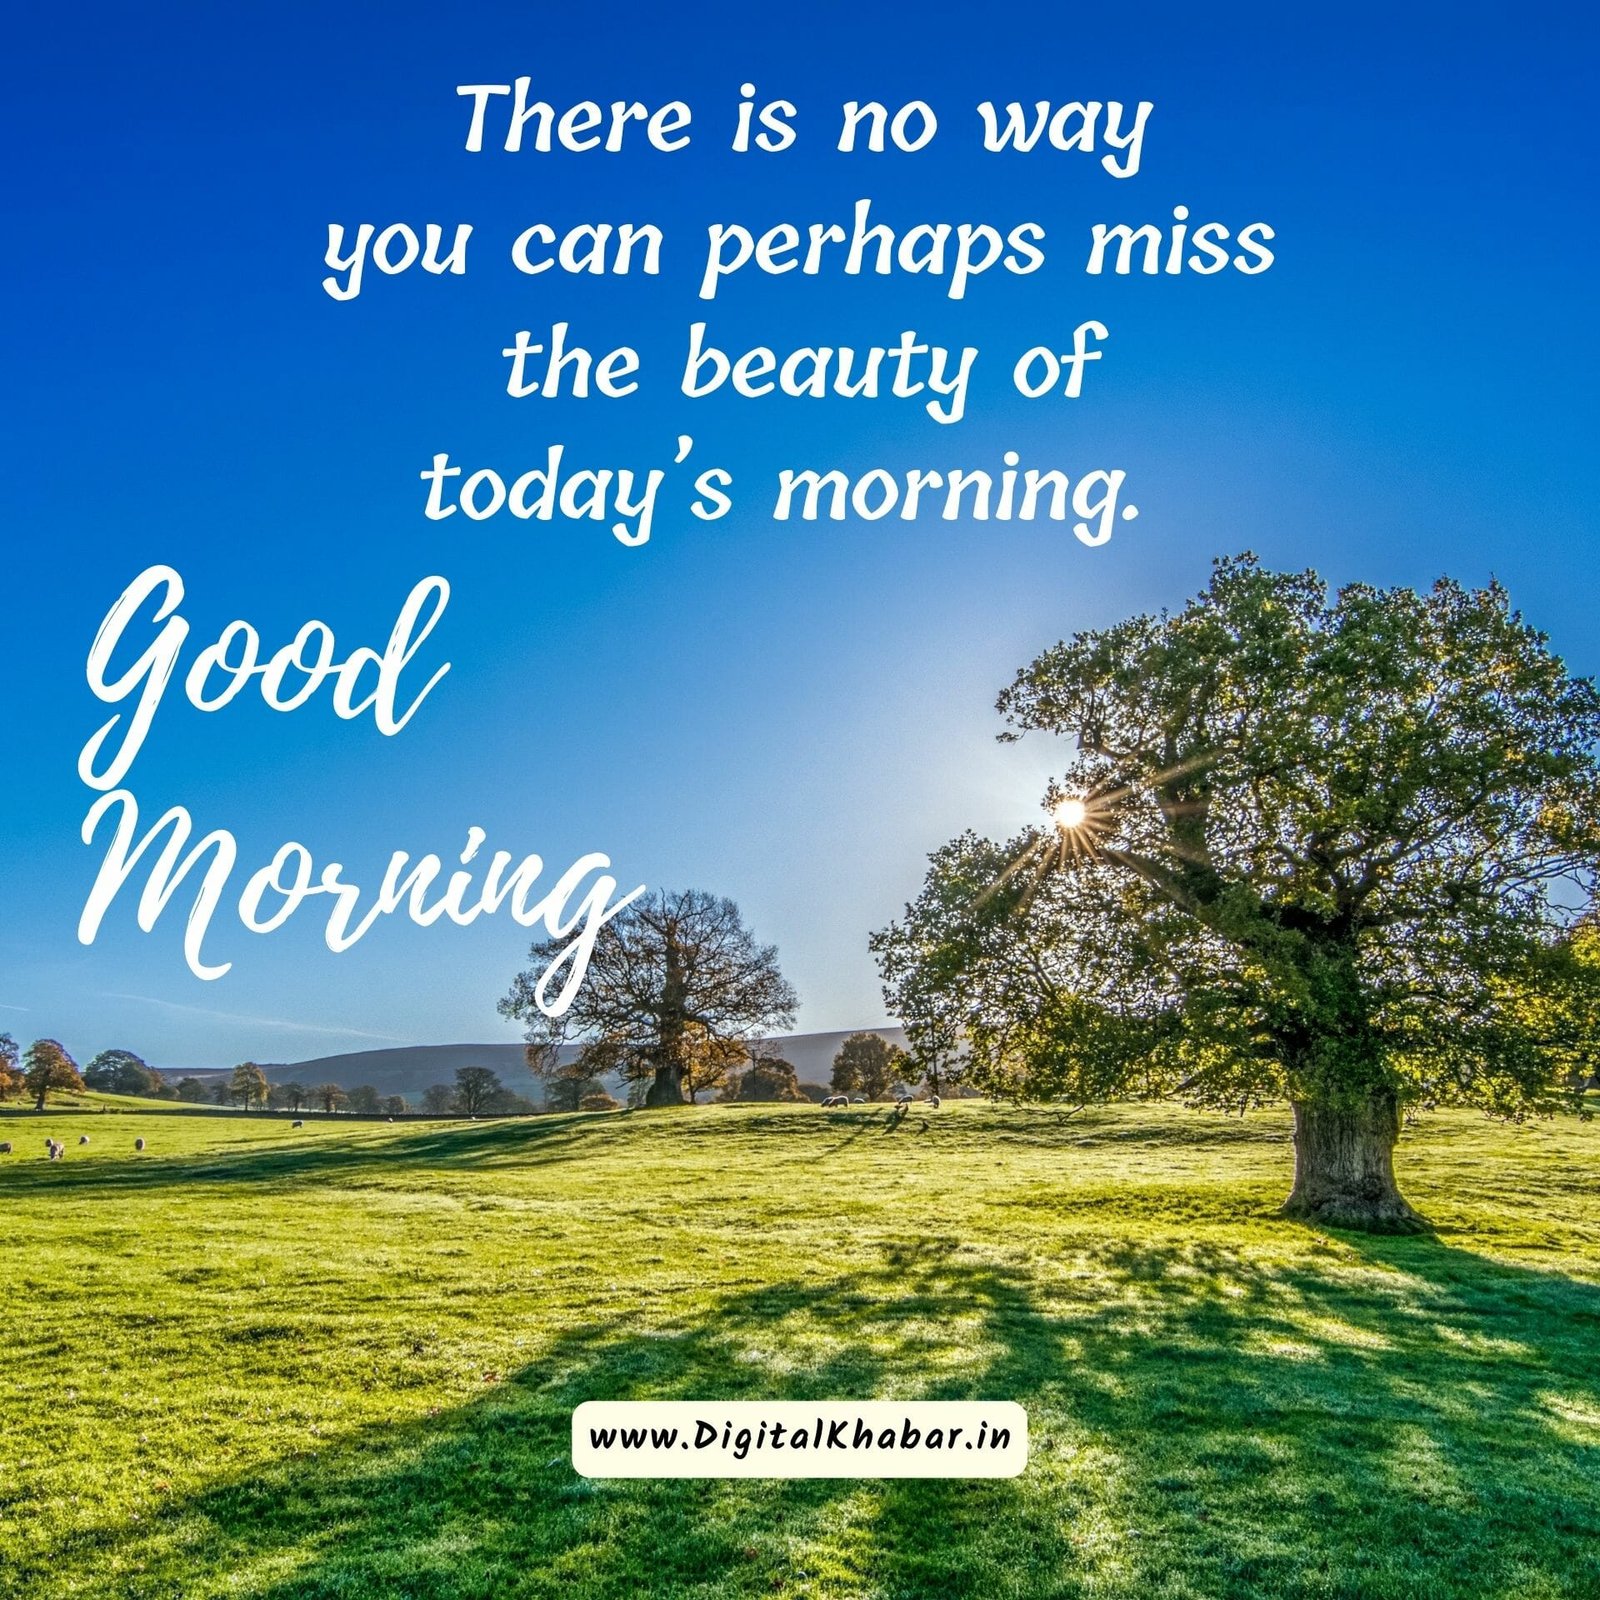 Good morning nature images with quotes